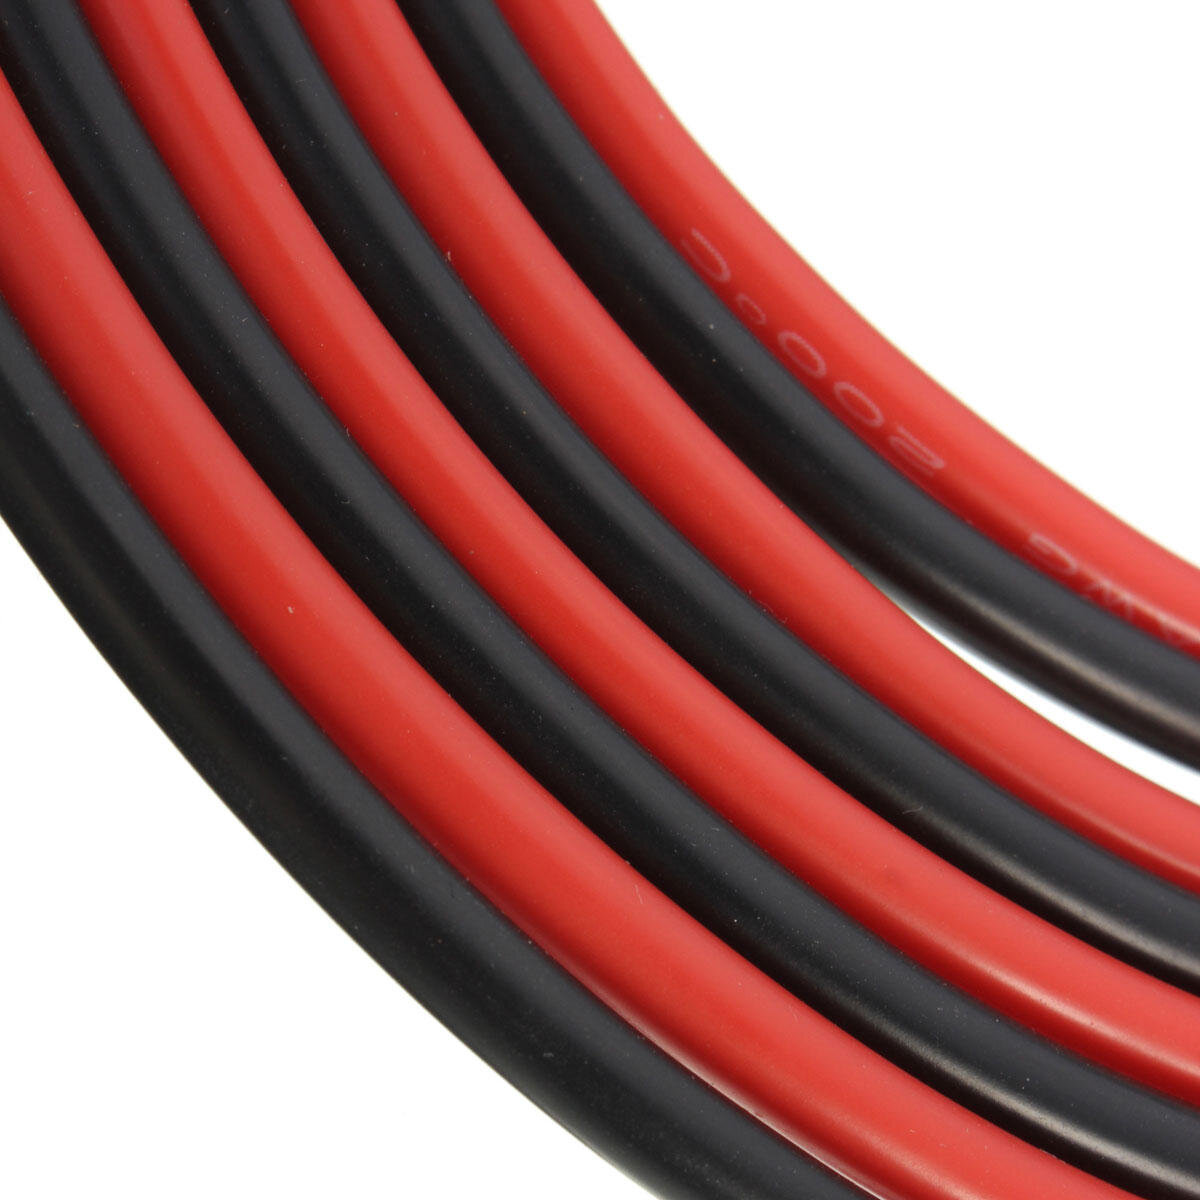 DANIU 12 AWG 10 Feet 3M Gauge Silicone Wire Flexible Stranded Copper Cables For RC Circuit